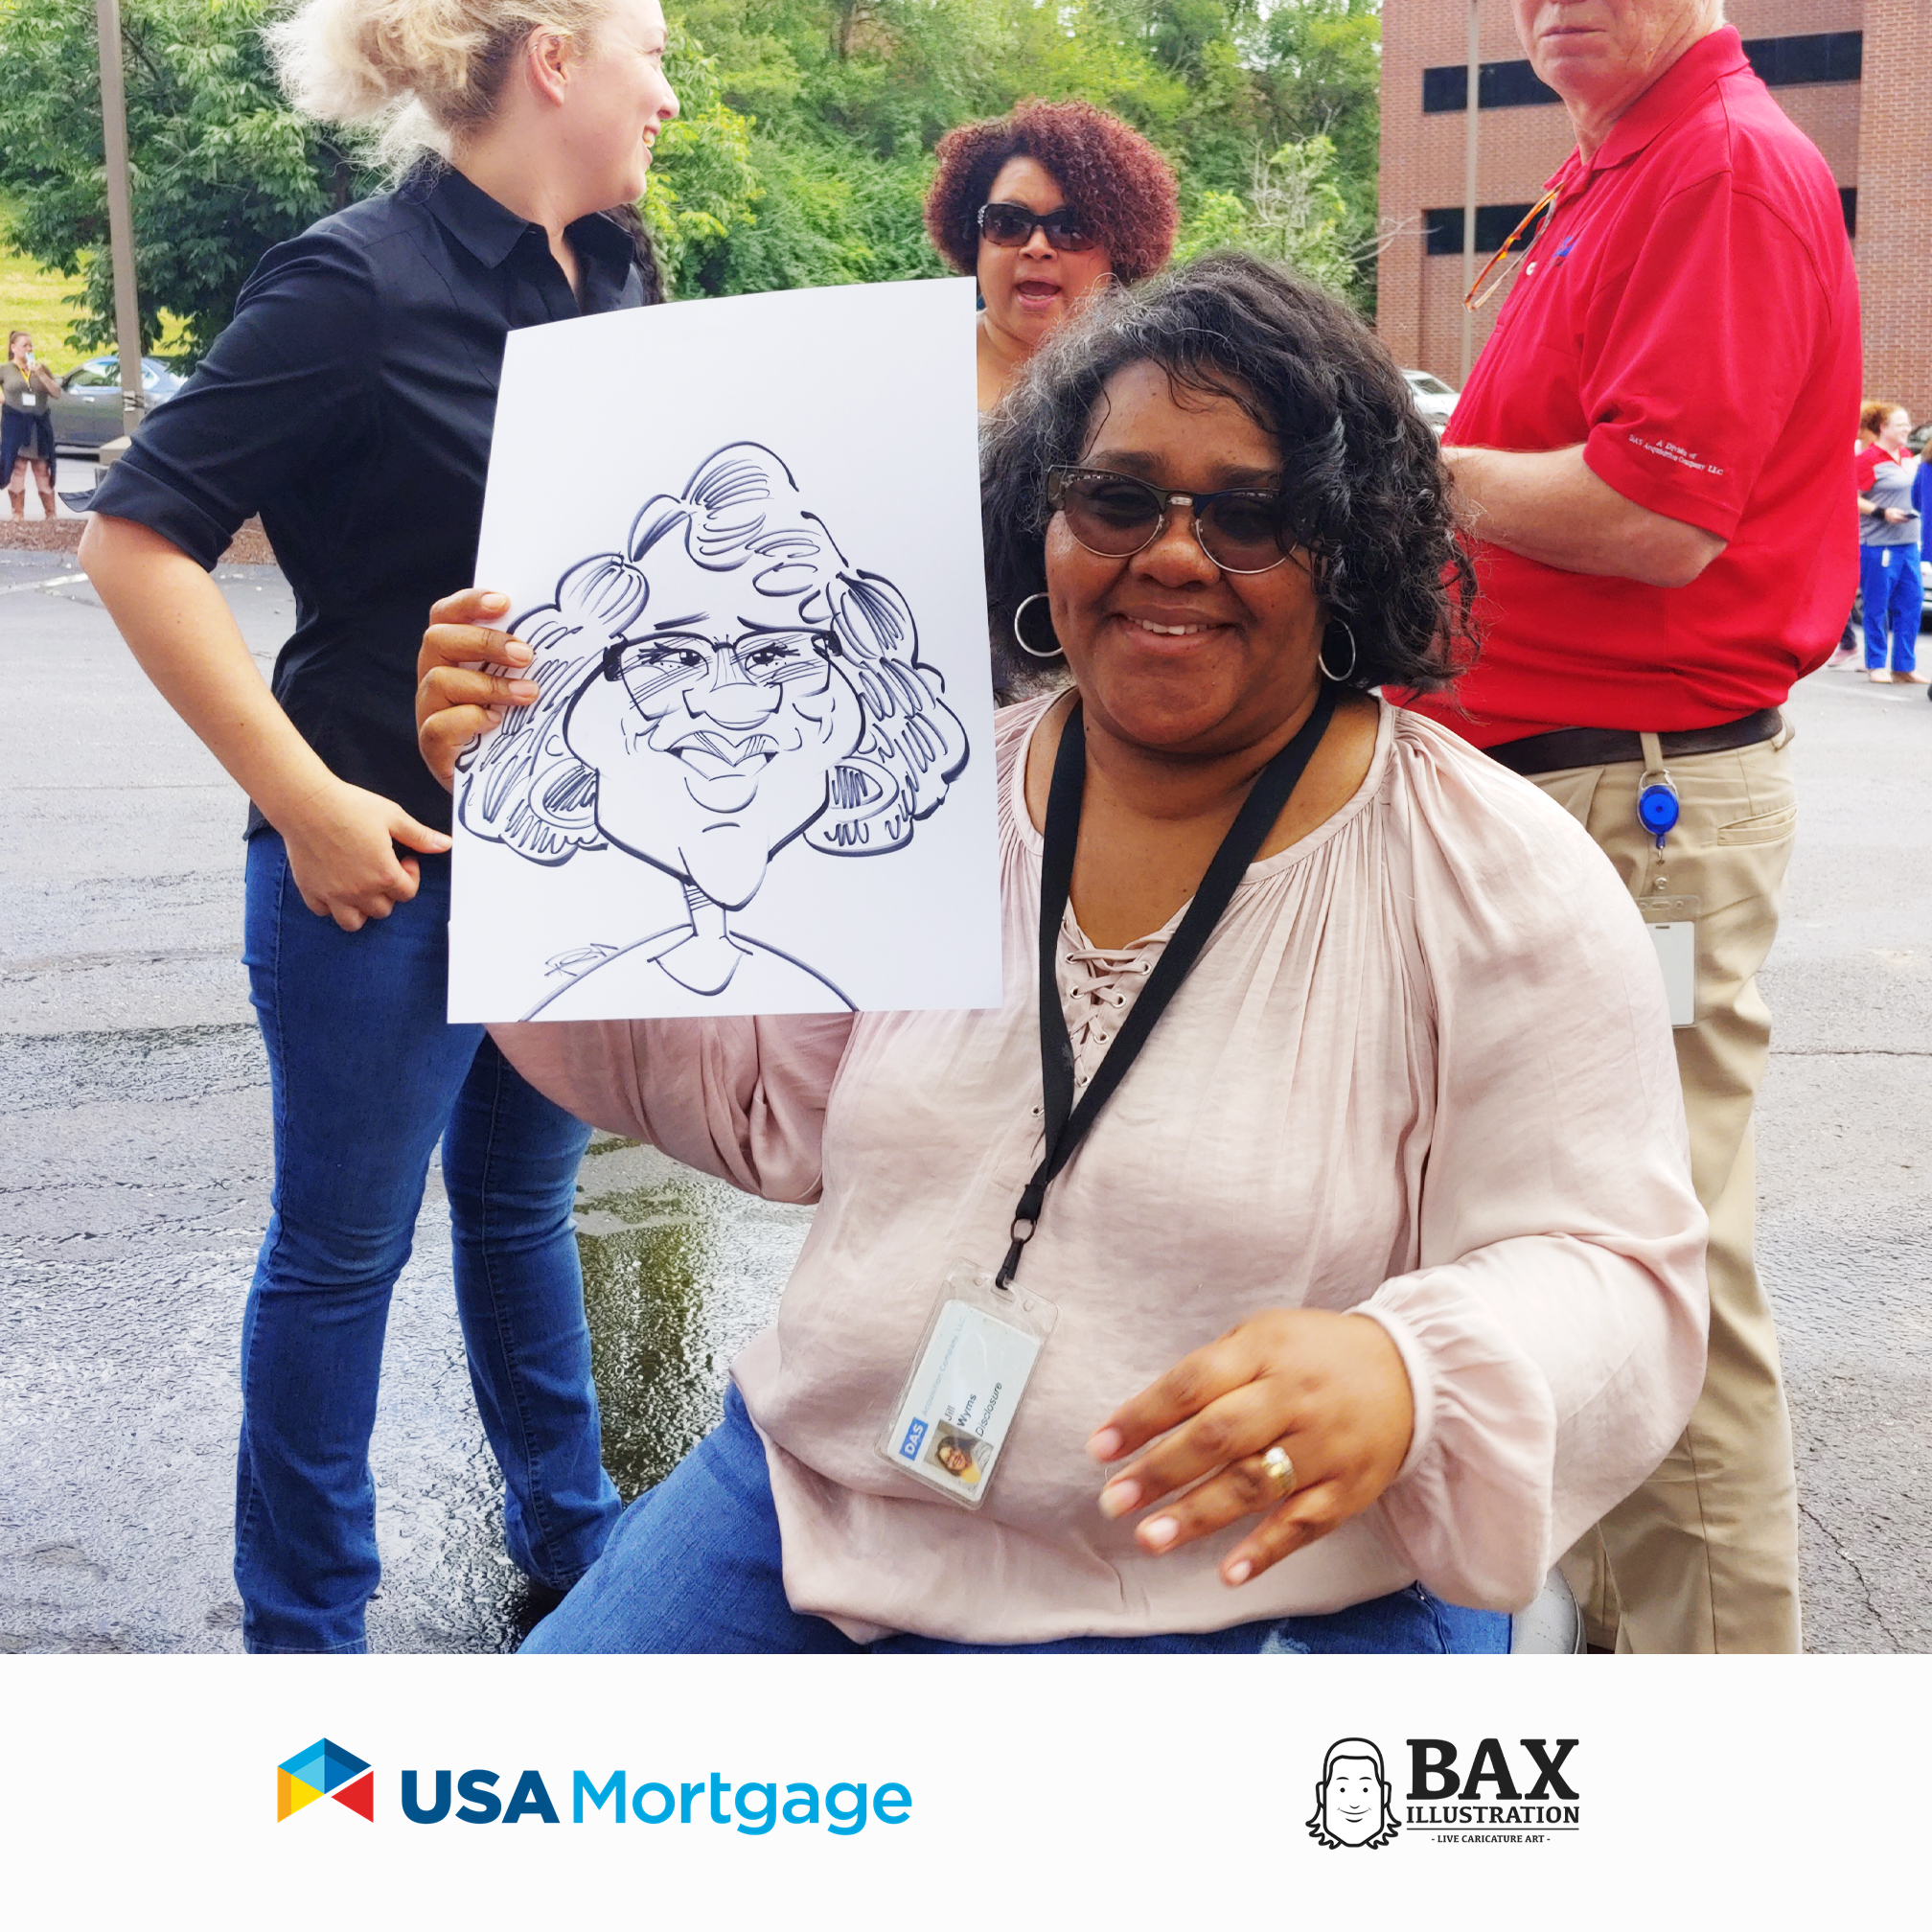 Woman holding caricature by Bax Illustration at a USA Mortgage event in St. Louis, Missouri